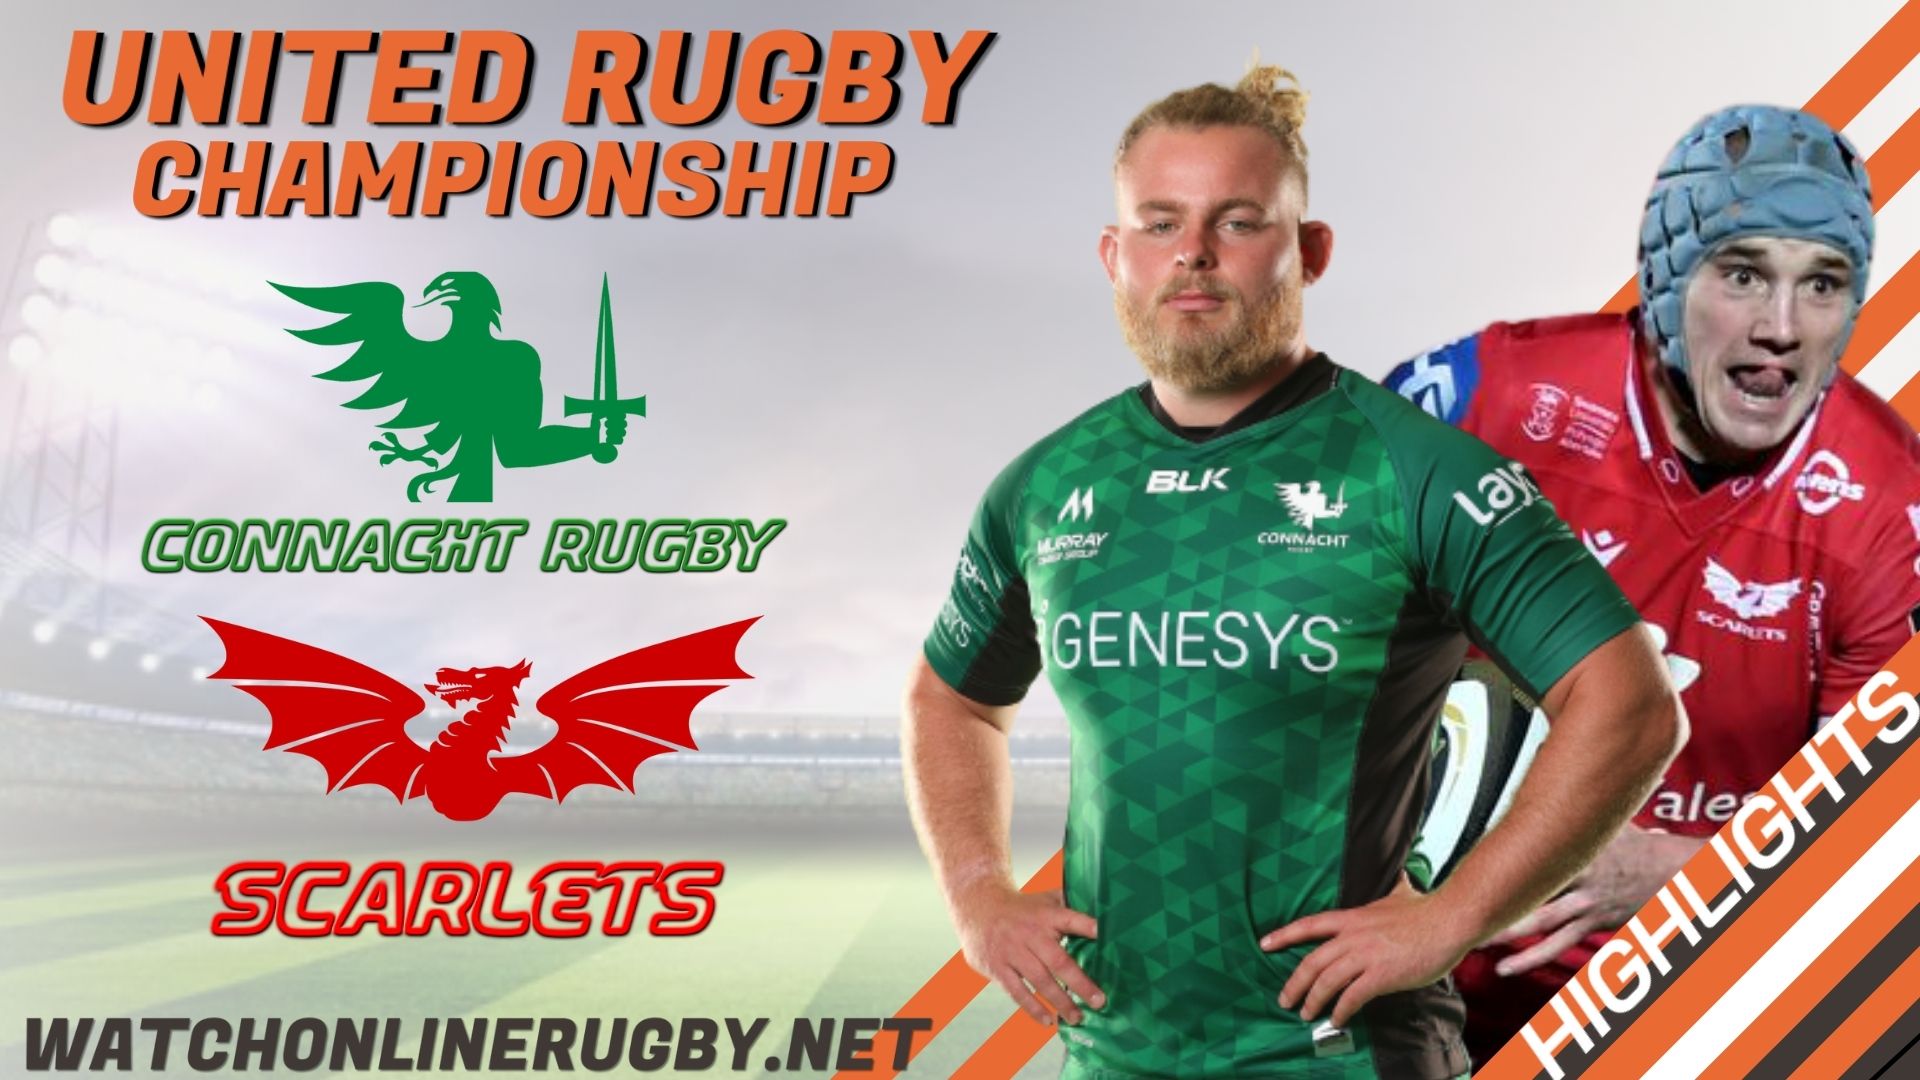 Scarlets Vs Connacht United Rugby Championship 2022 RD 12